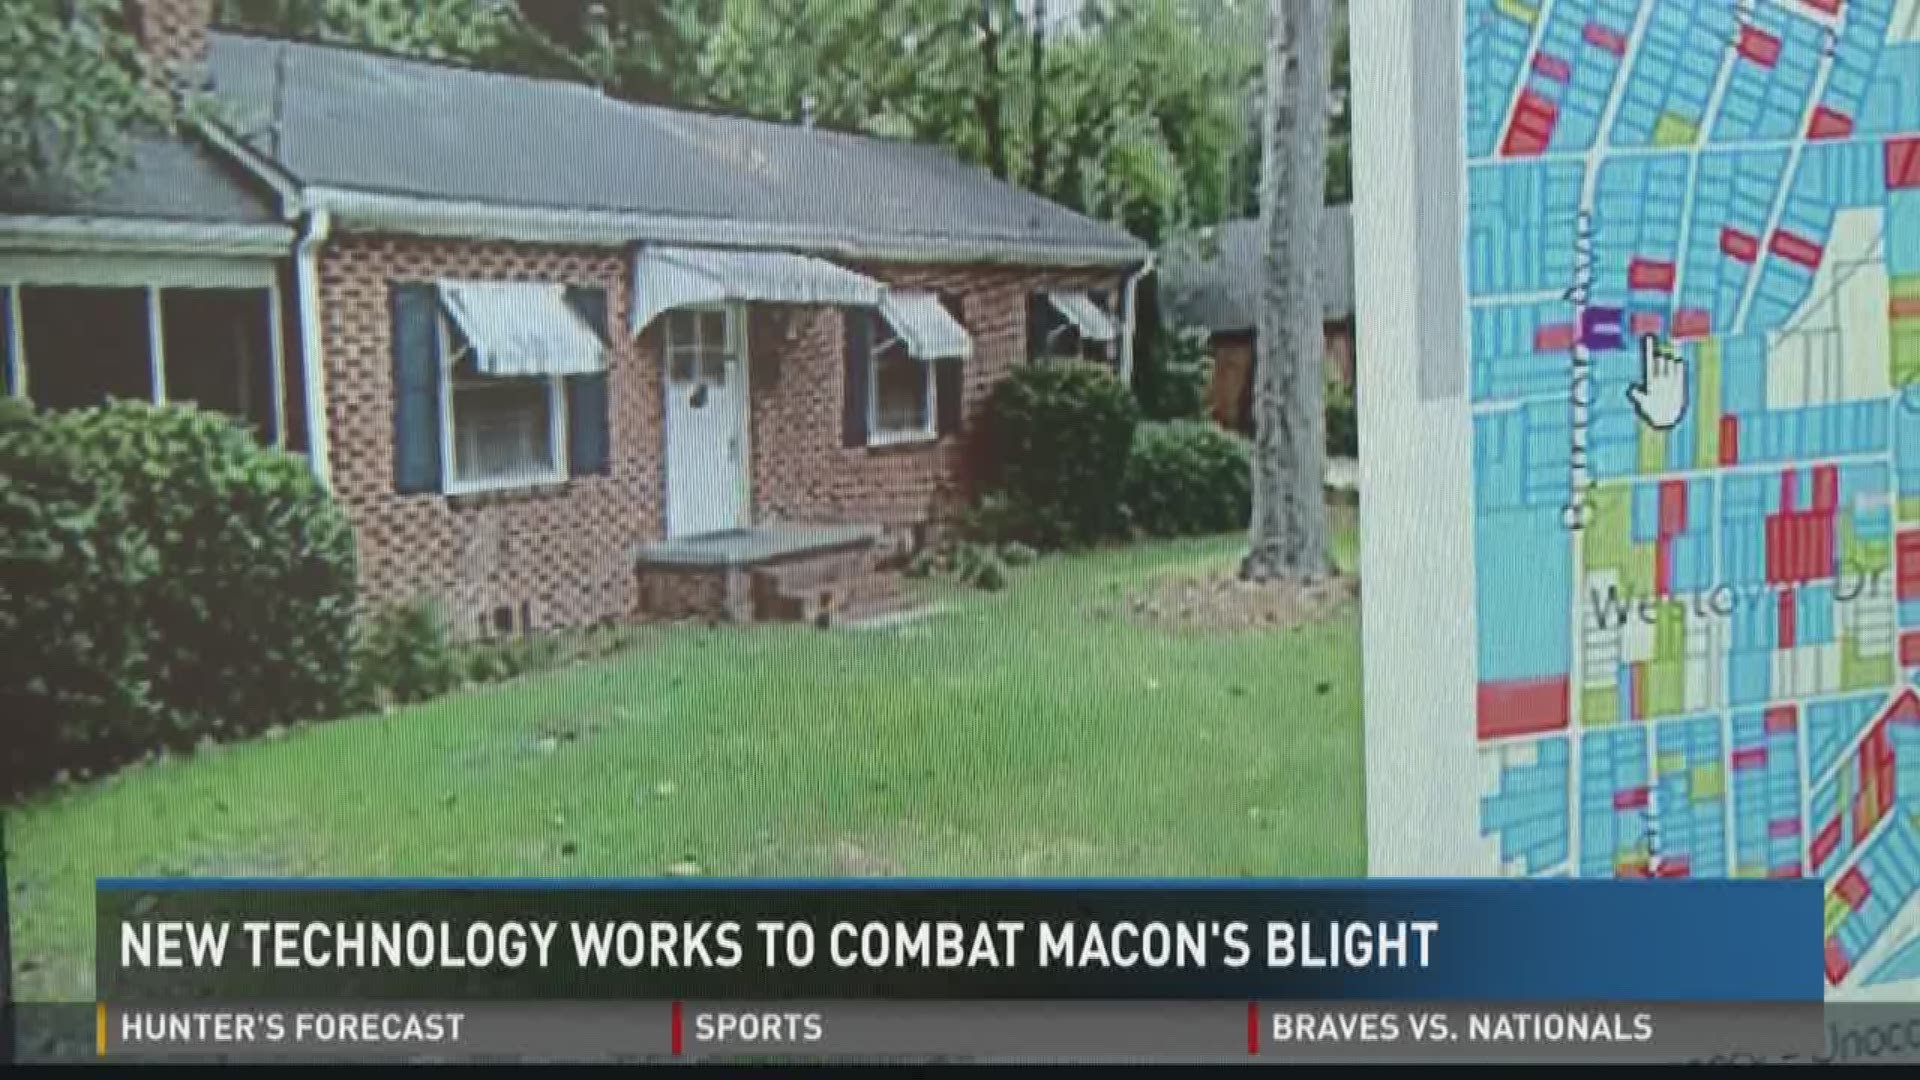 New technology works to combat Macon's blight